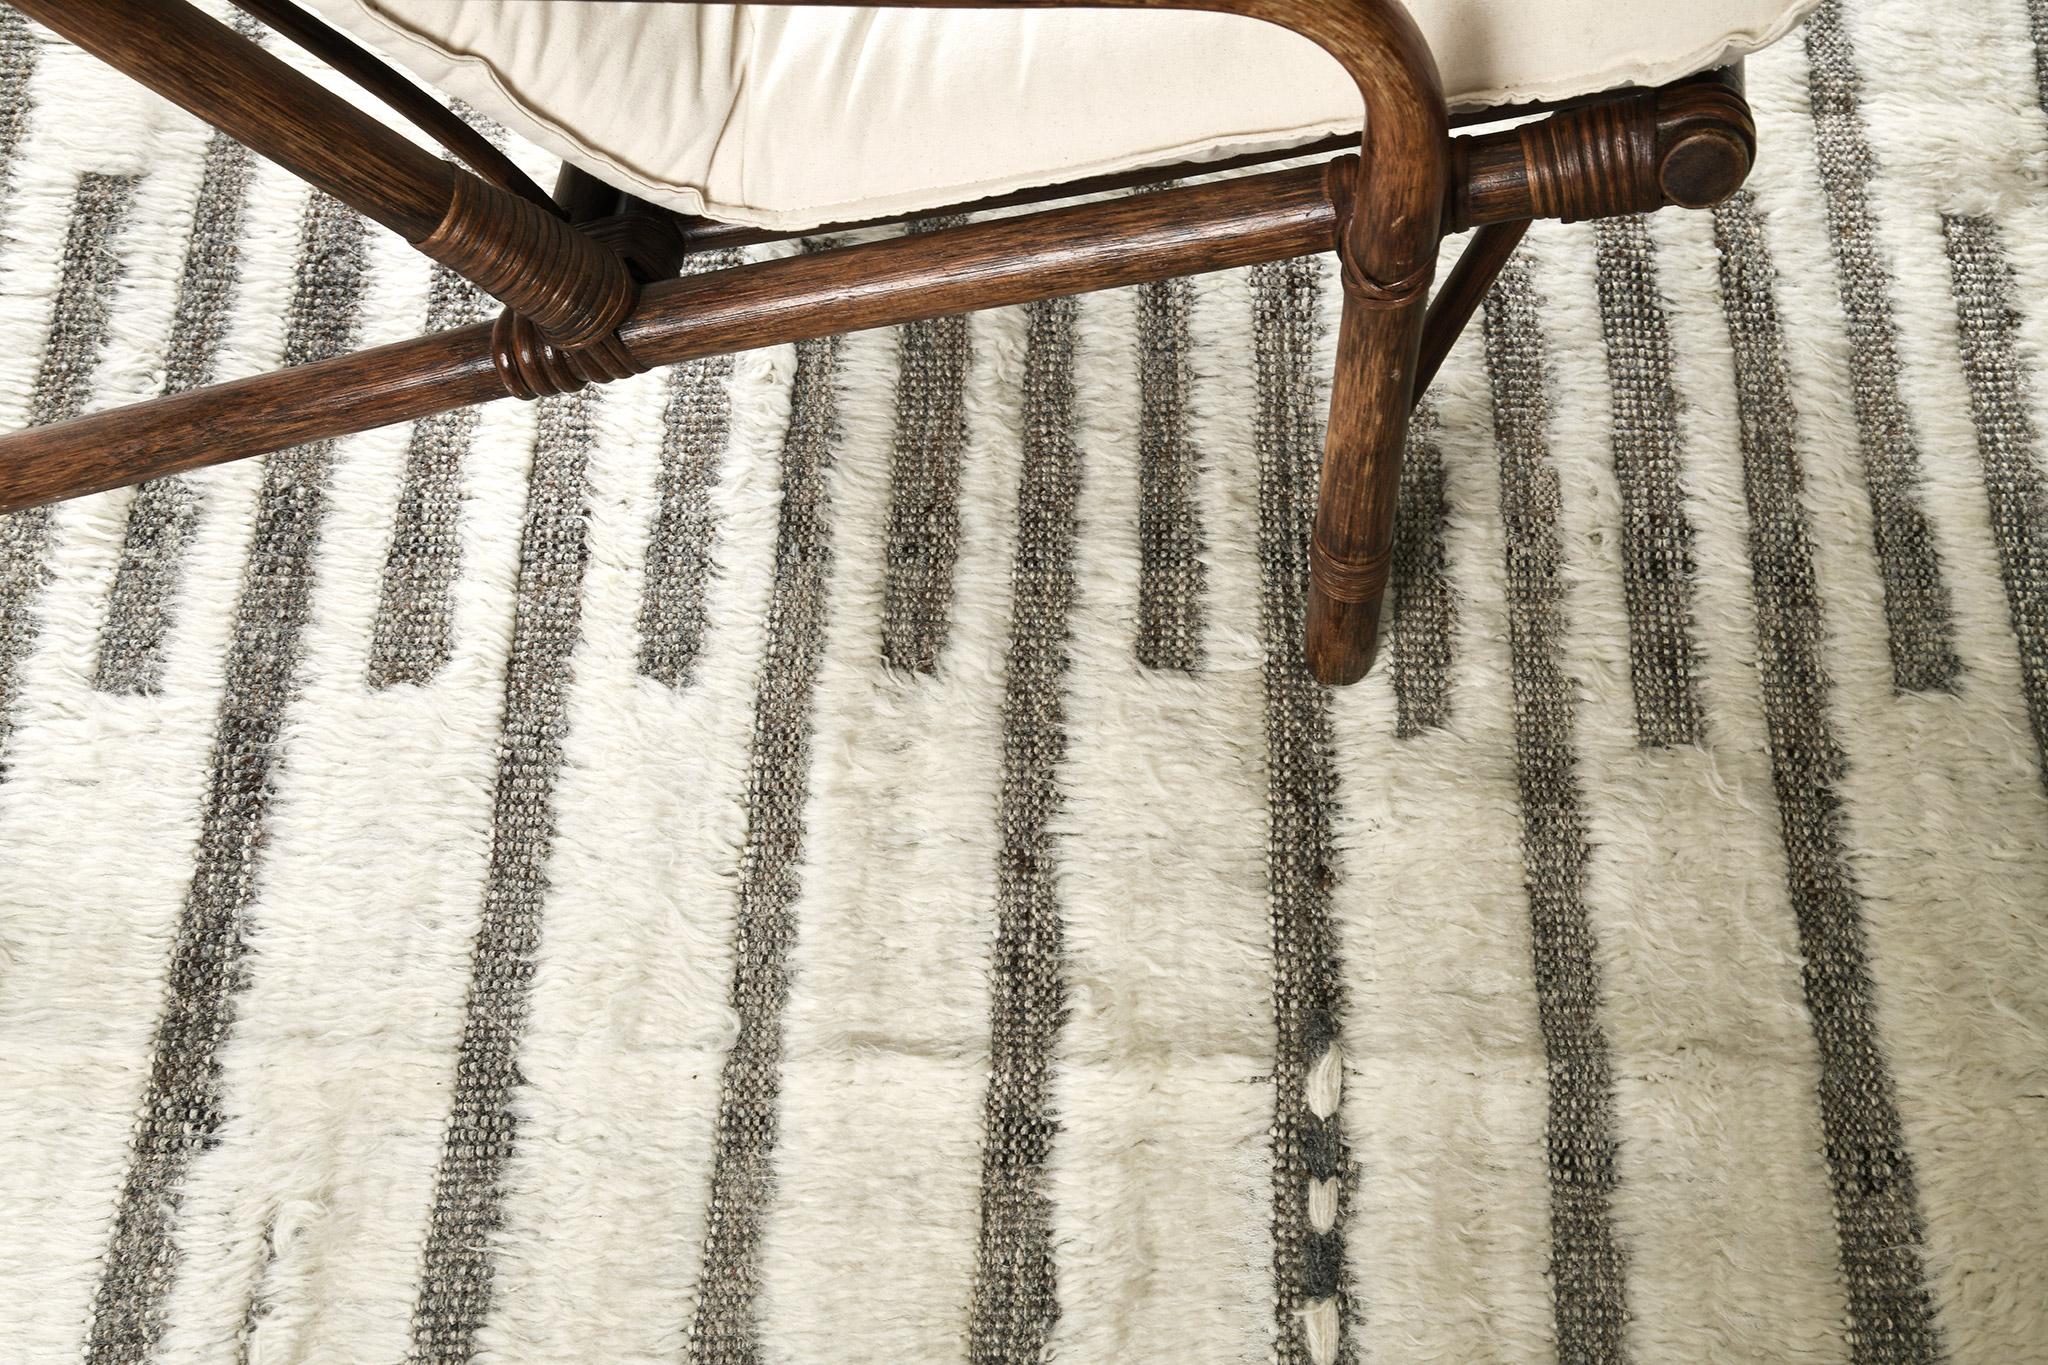 Handwoven of wool, Rashabar uses line work and color to create definition and movement. Embossed detailing of taupish grey moves across the rug with an umber brown shag surface. Natural flat weave runs around the border with tasseled ends.

Rug